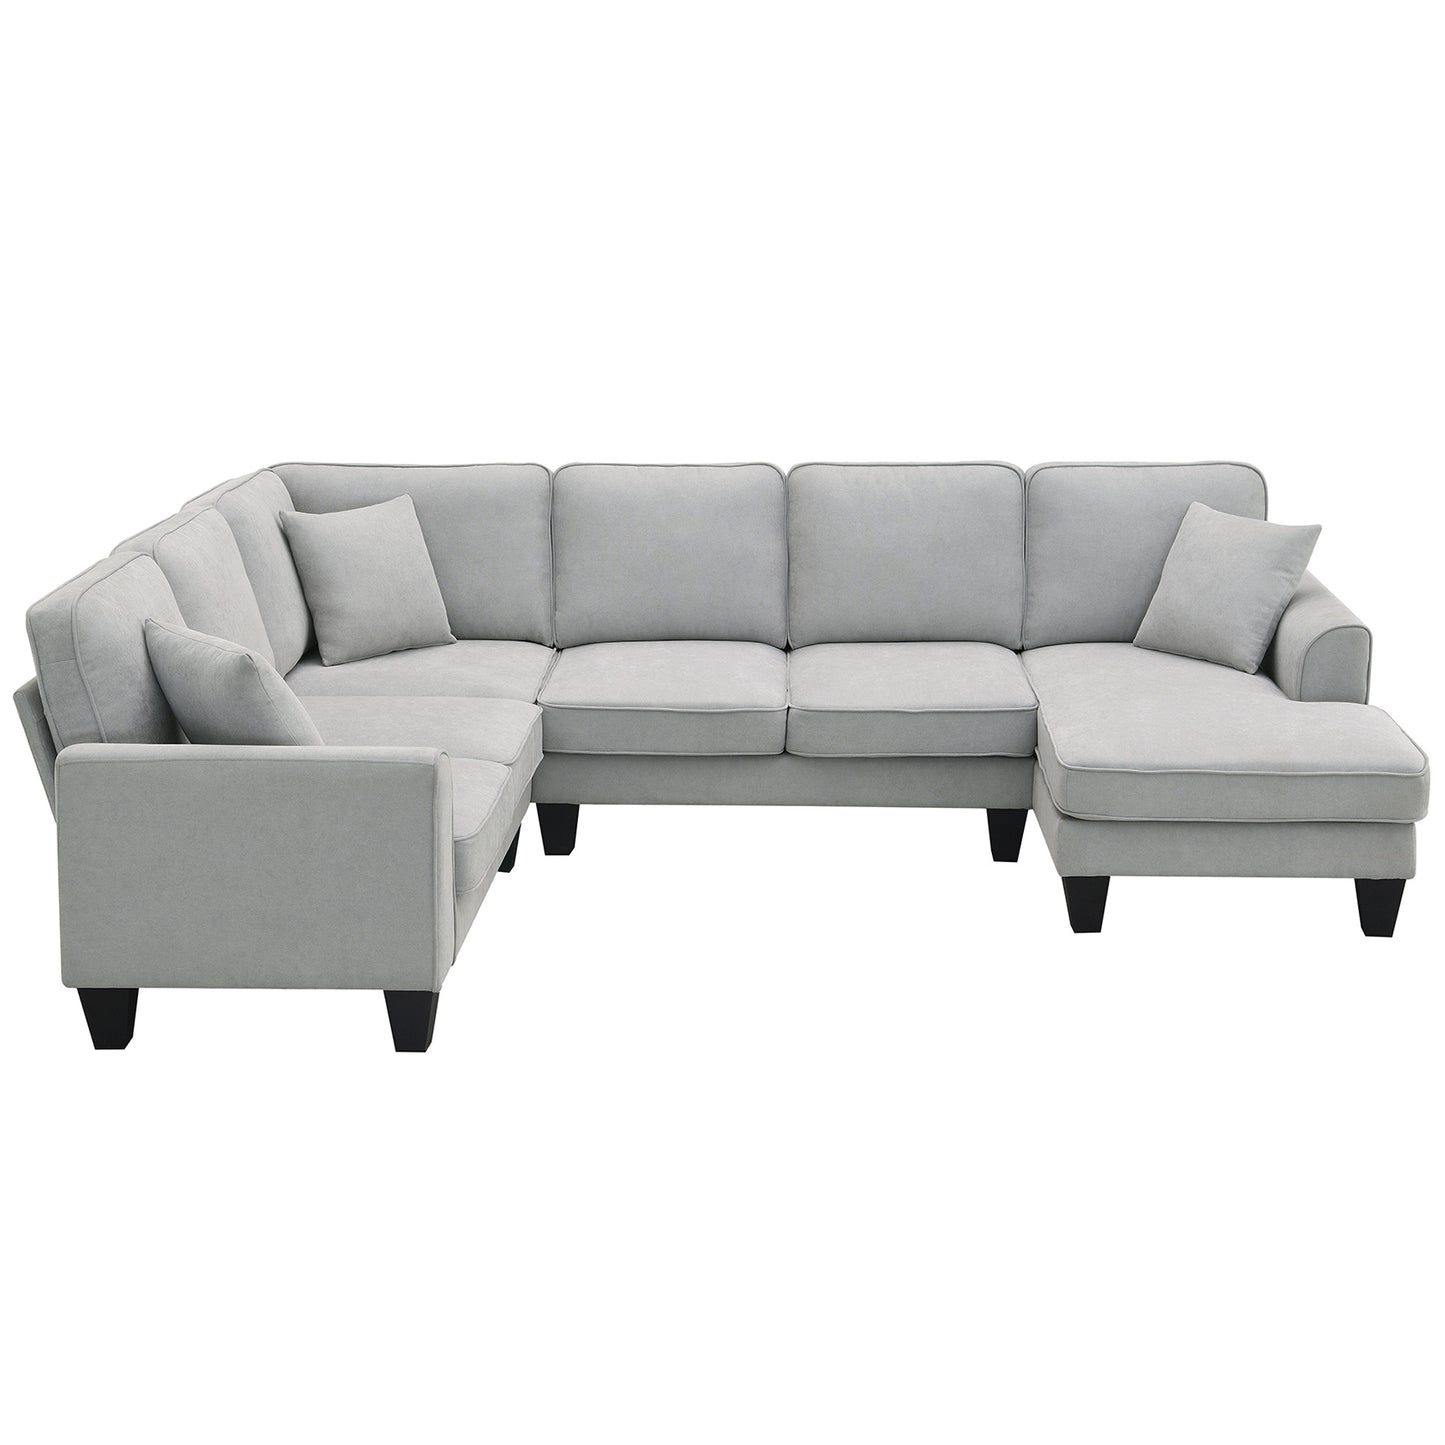 [VIDEO provided] [New] 108*85.5" Modern U Shape Sectional Sofa, 7 Seat Fabric Sectional Sofa Set with 3 Pillows Included for Living Room, Apartment, Office,3 Colors